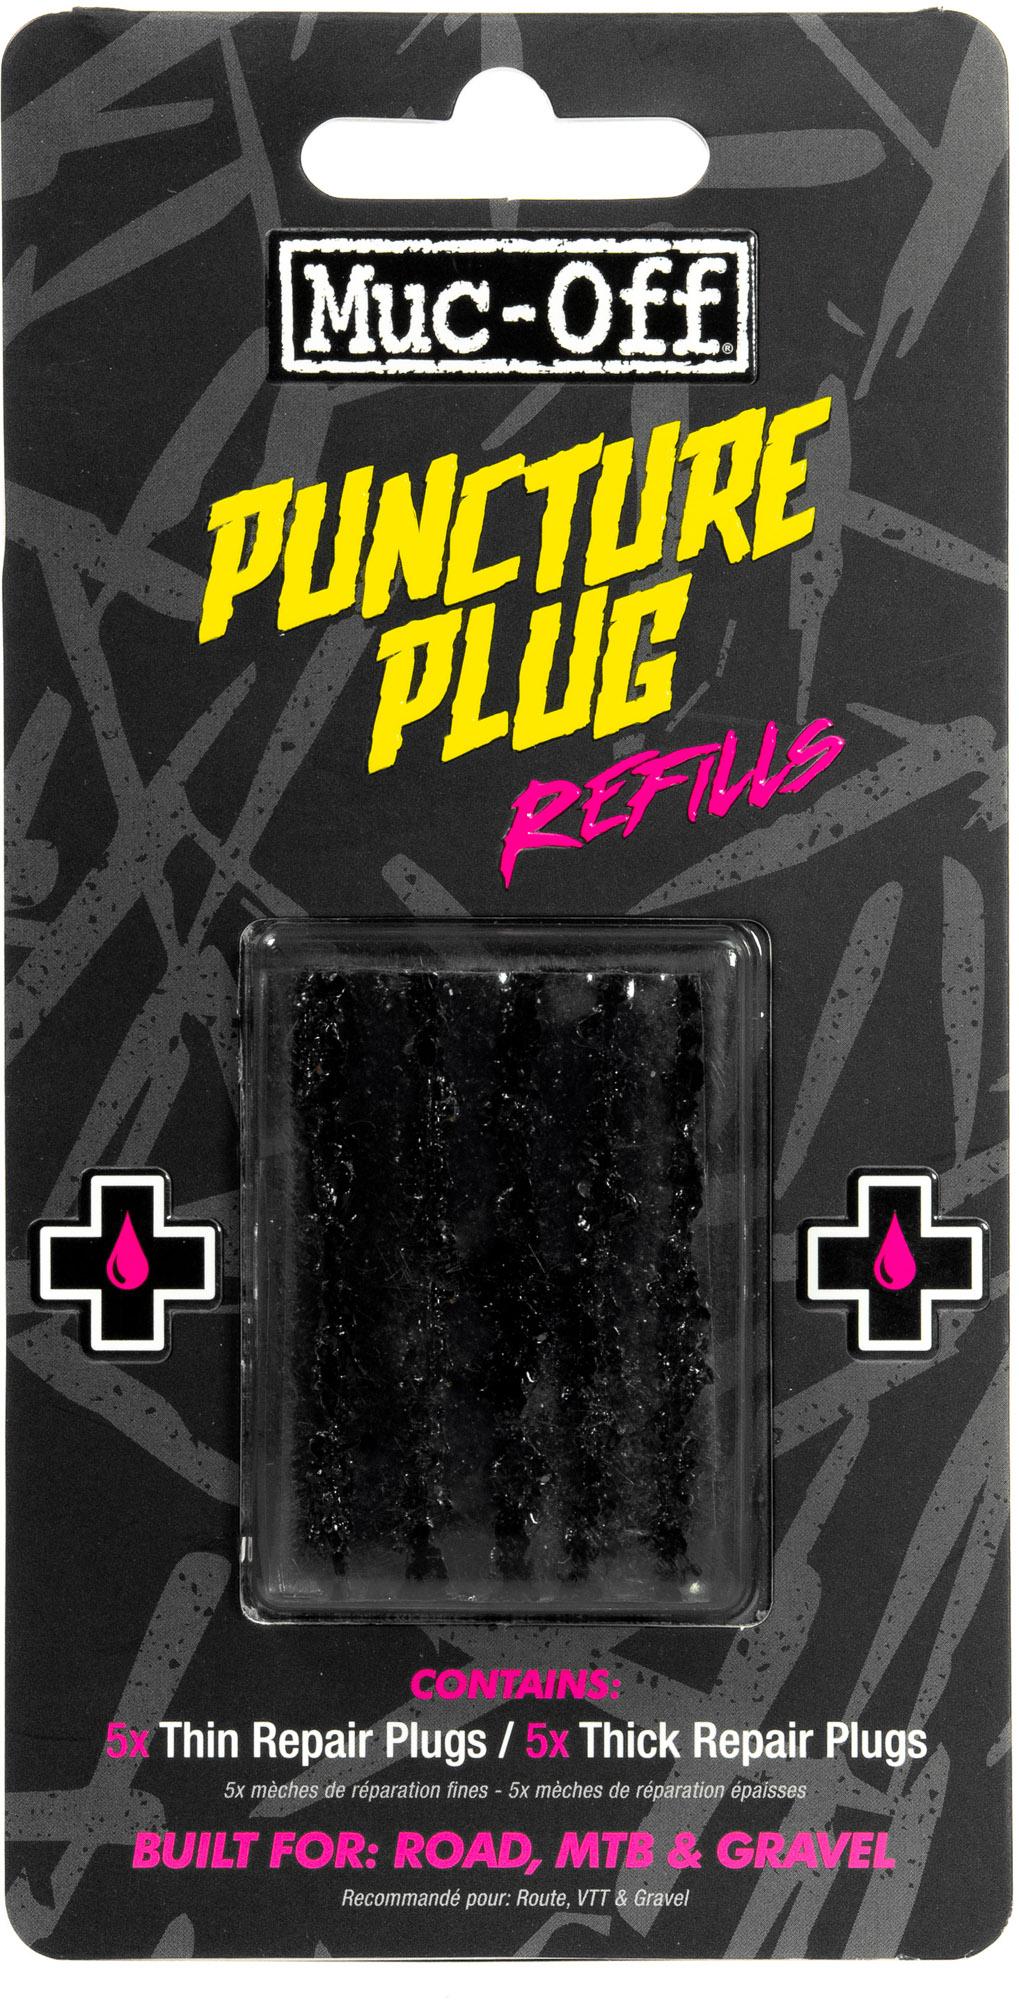 Muc-off Puncture Plugs Tubeless Refill Pack - Black